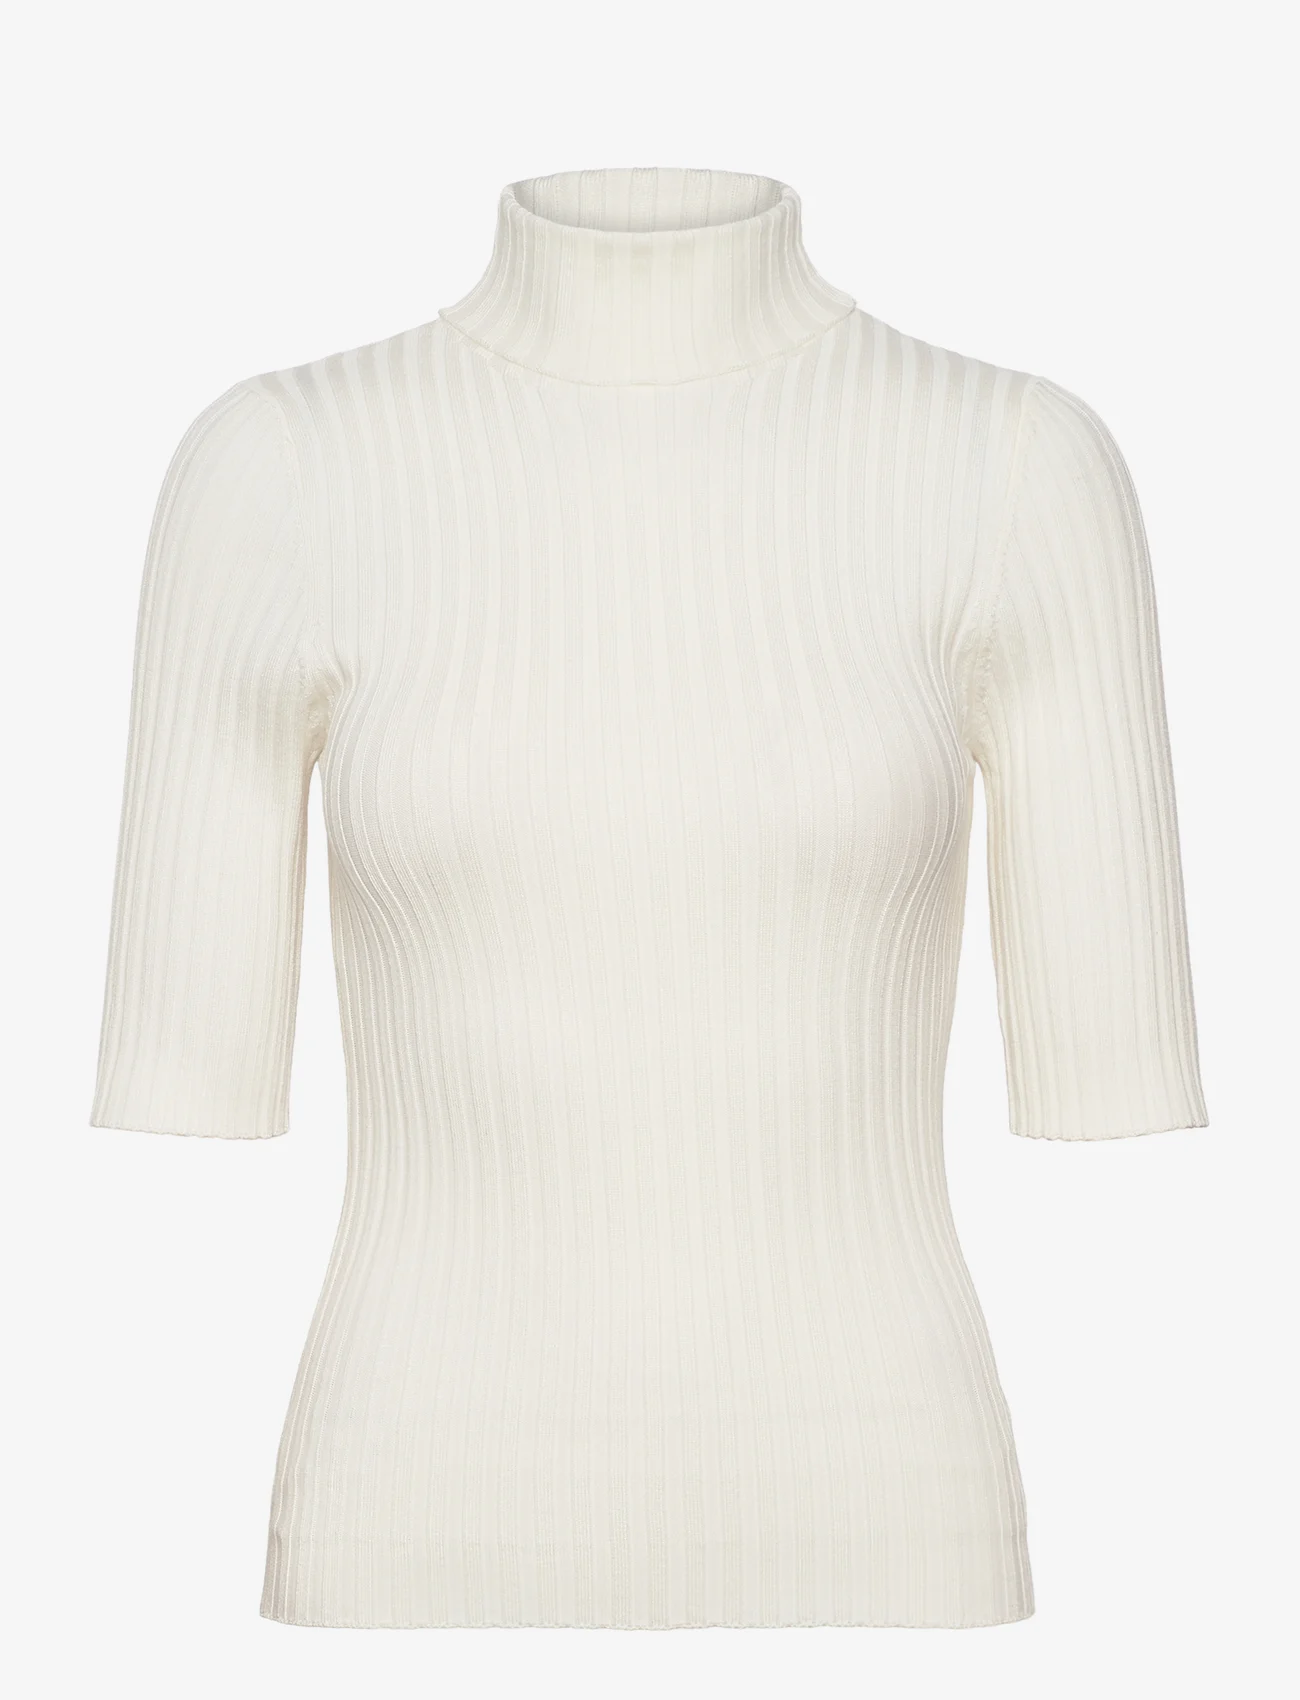 NORR - Franco knit tee - gensere - off-white - 0